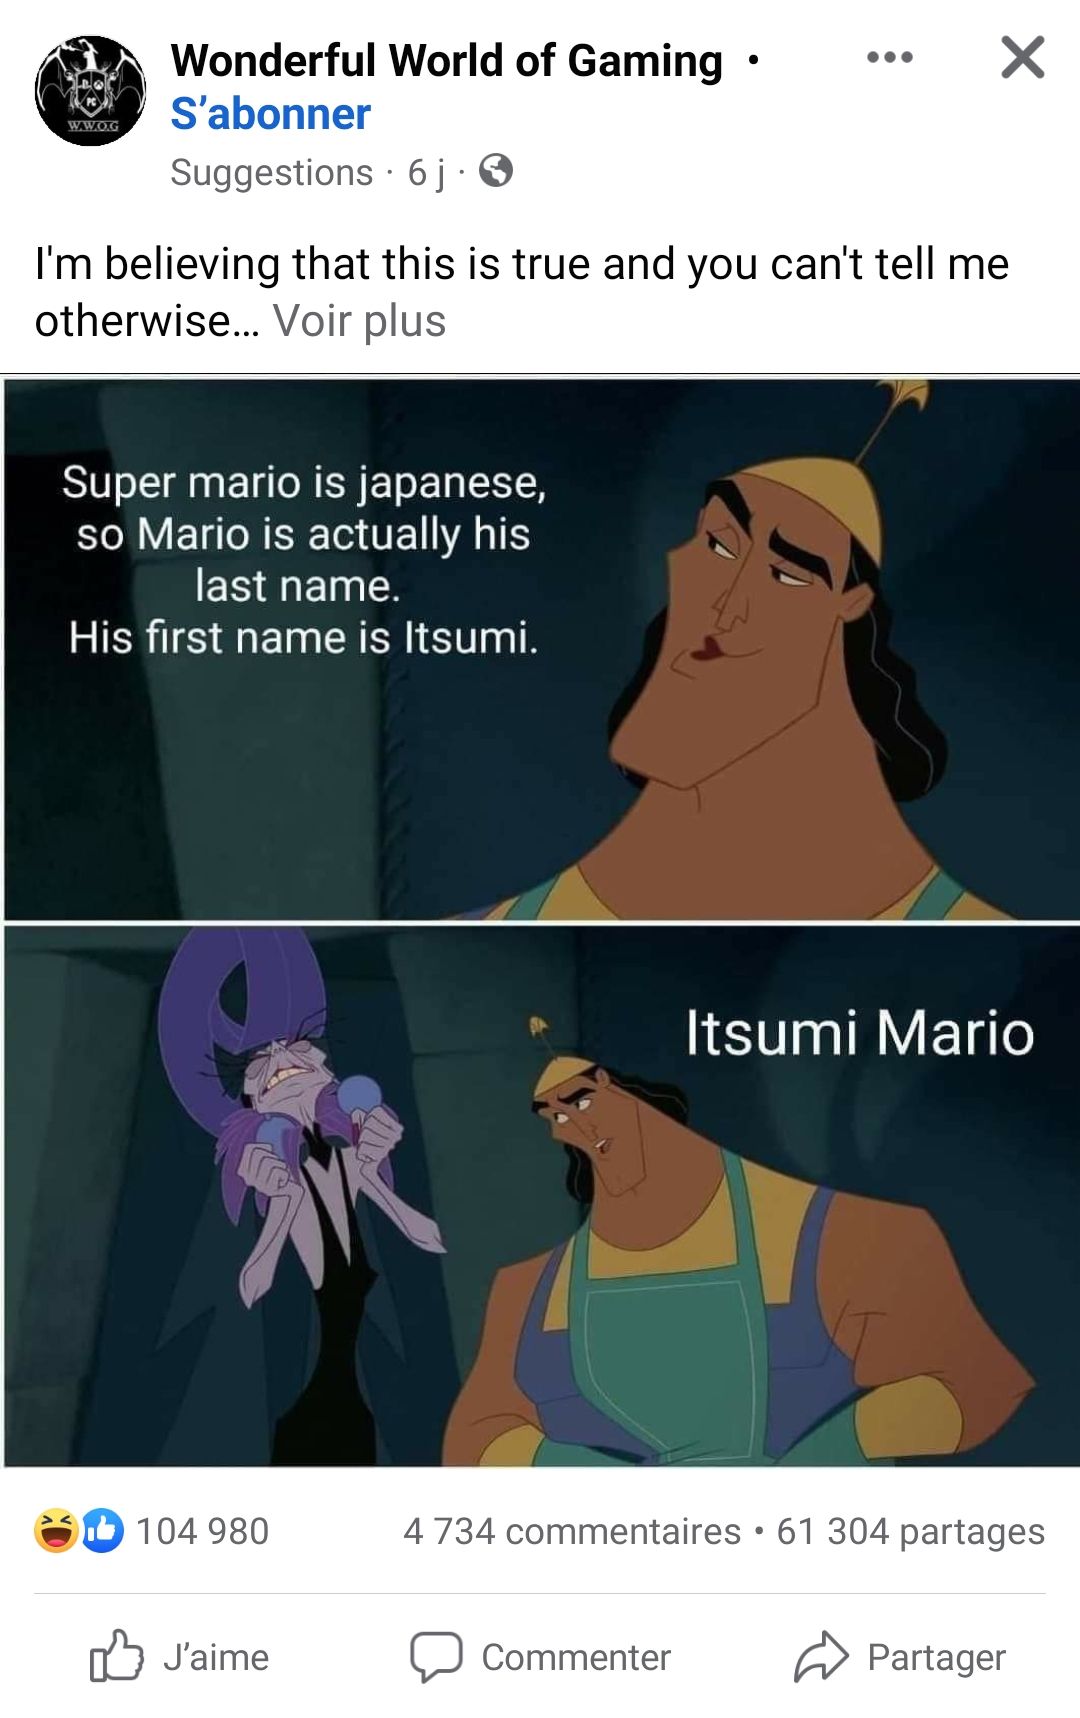 A meme with characters from Kuzco about Mario